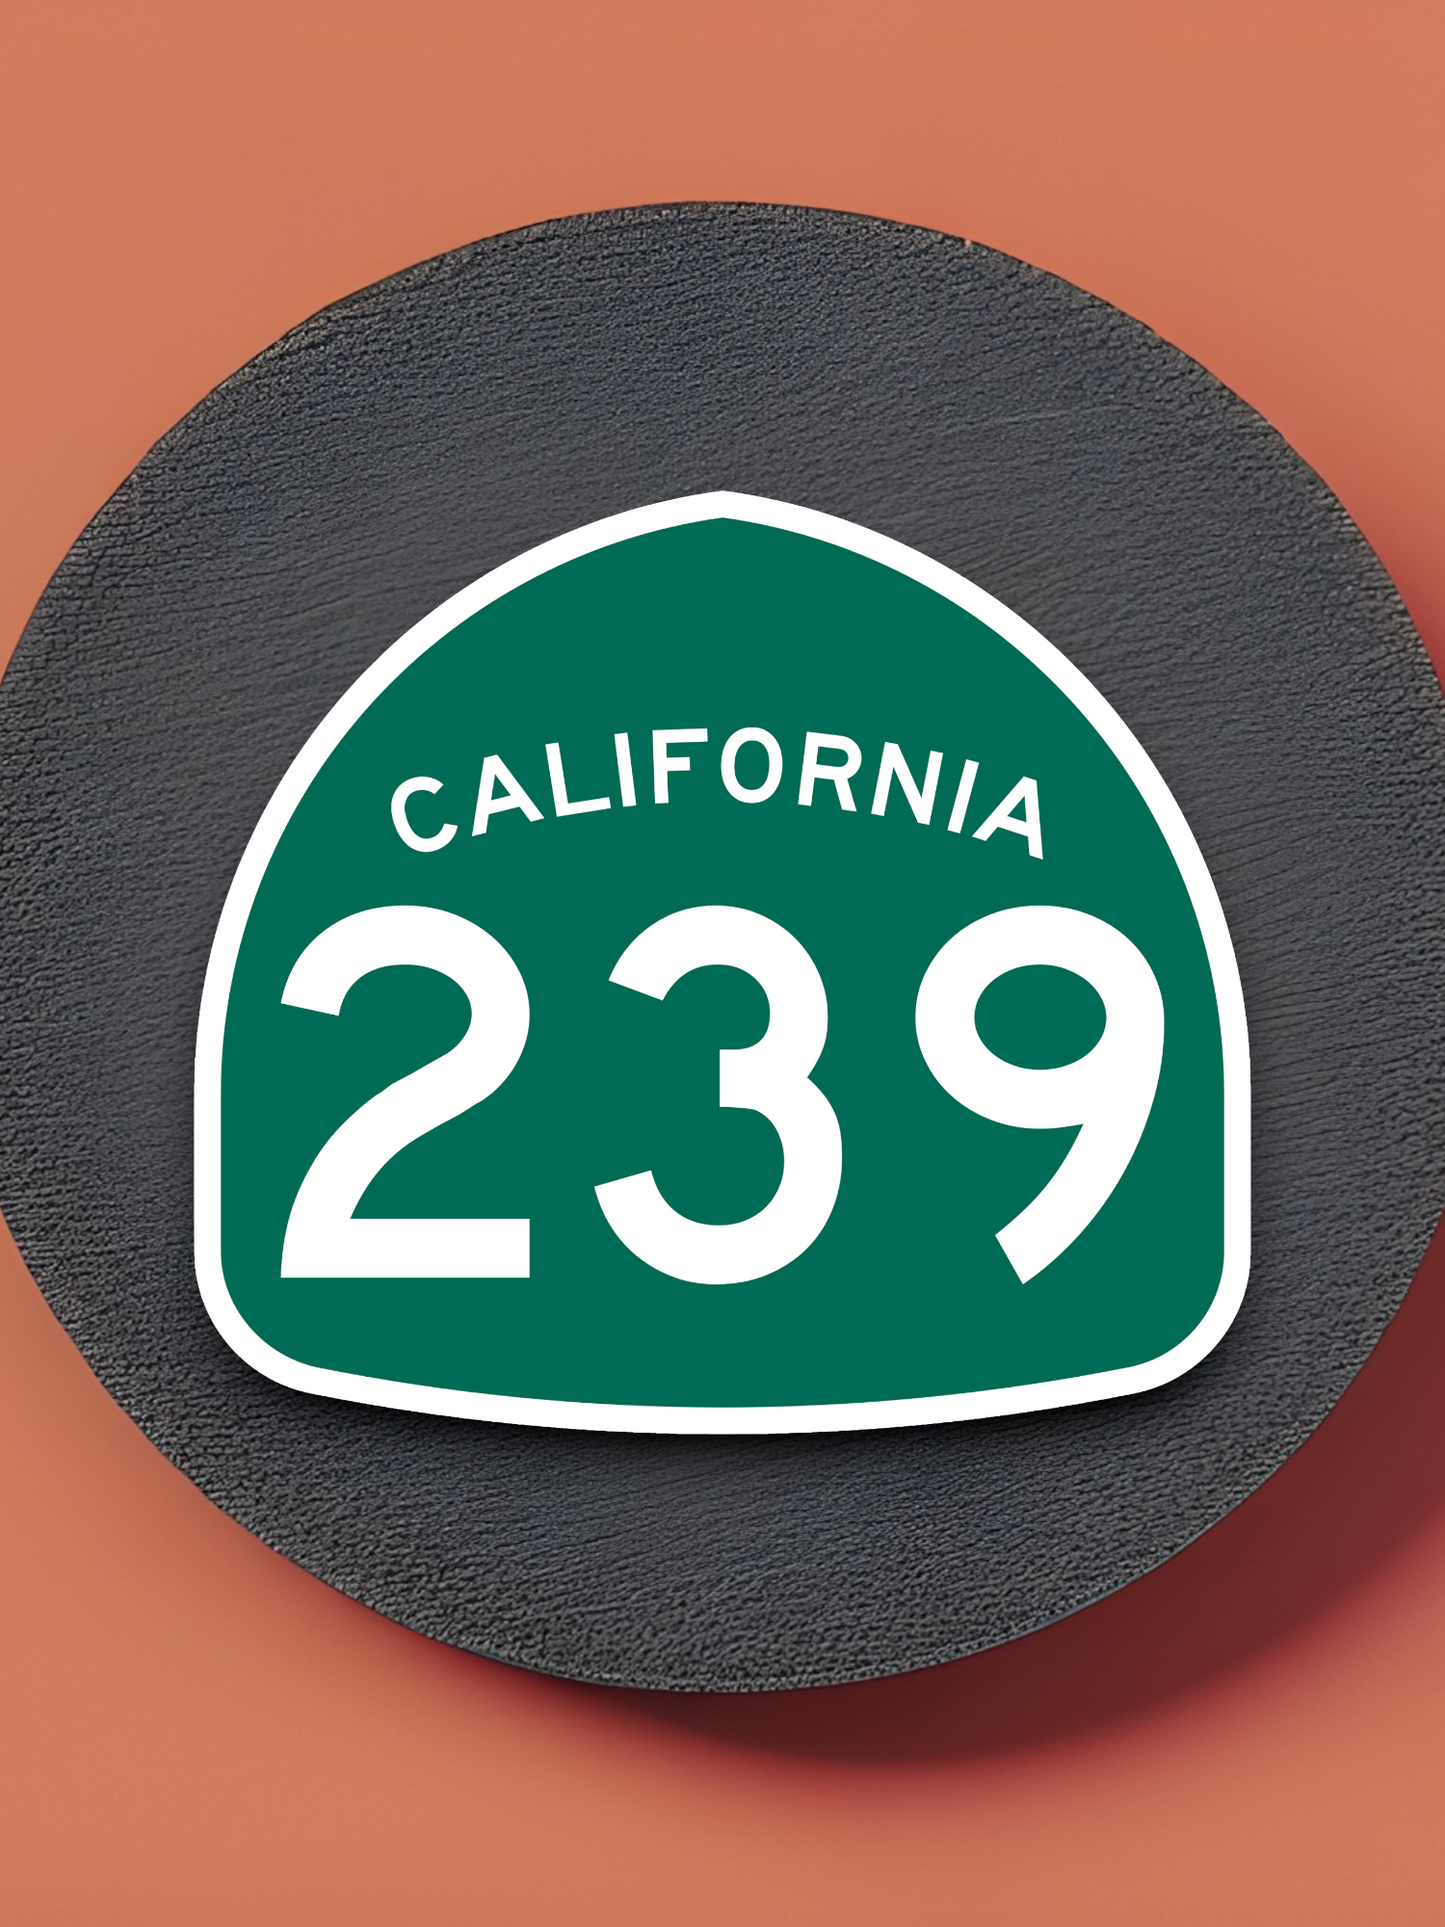 California State Route 239 Road Sign Sticker